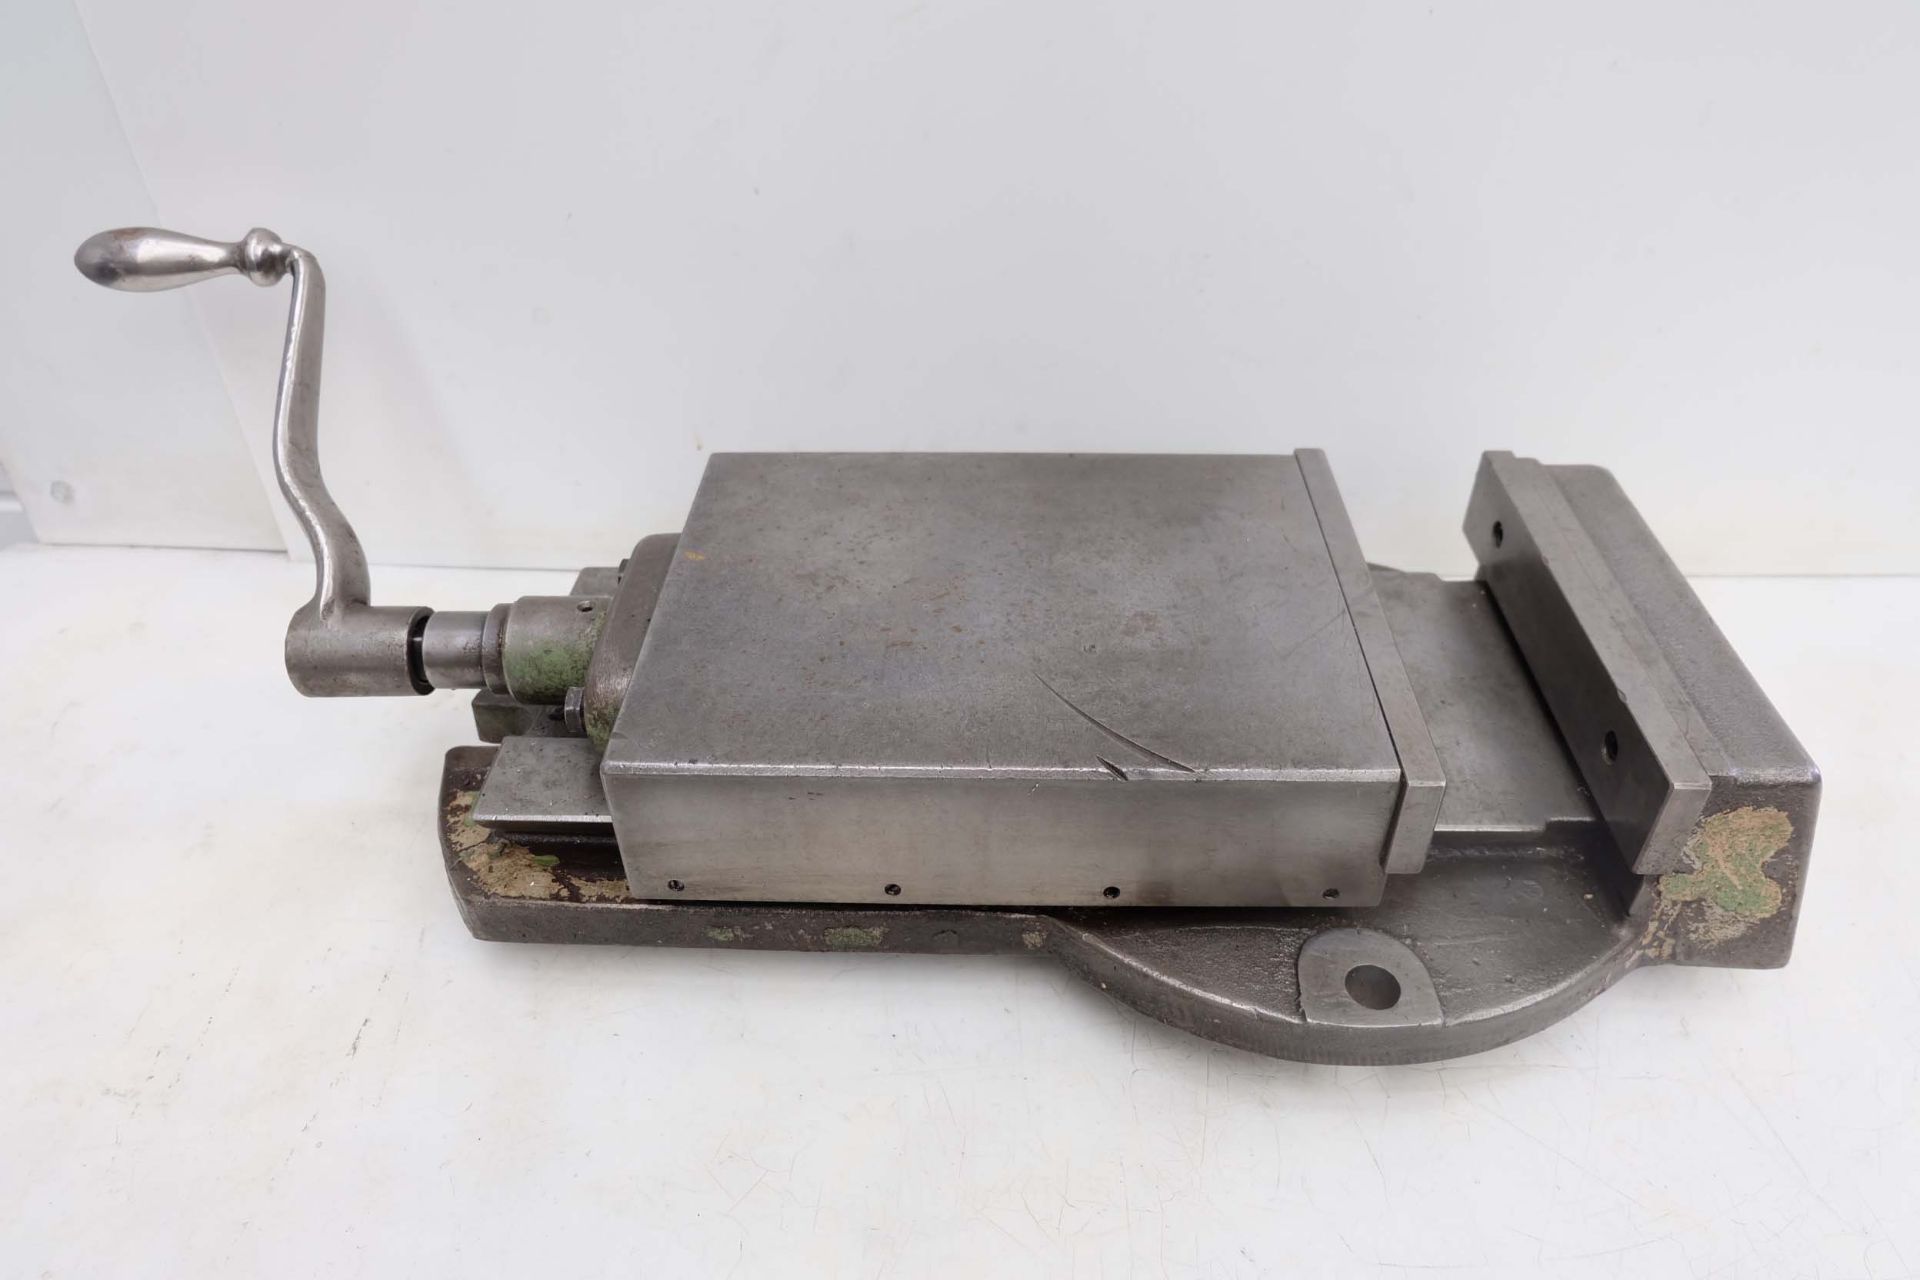 Abwood 8" Engineers Machine Vice. Jaw Width 210mm. Jaw Height 50mm. Max Opening 200mm.